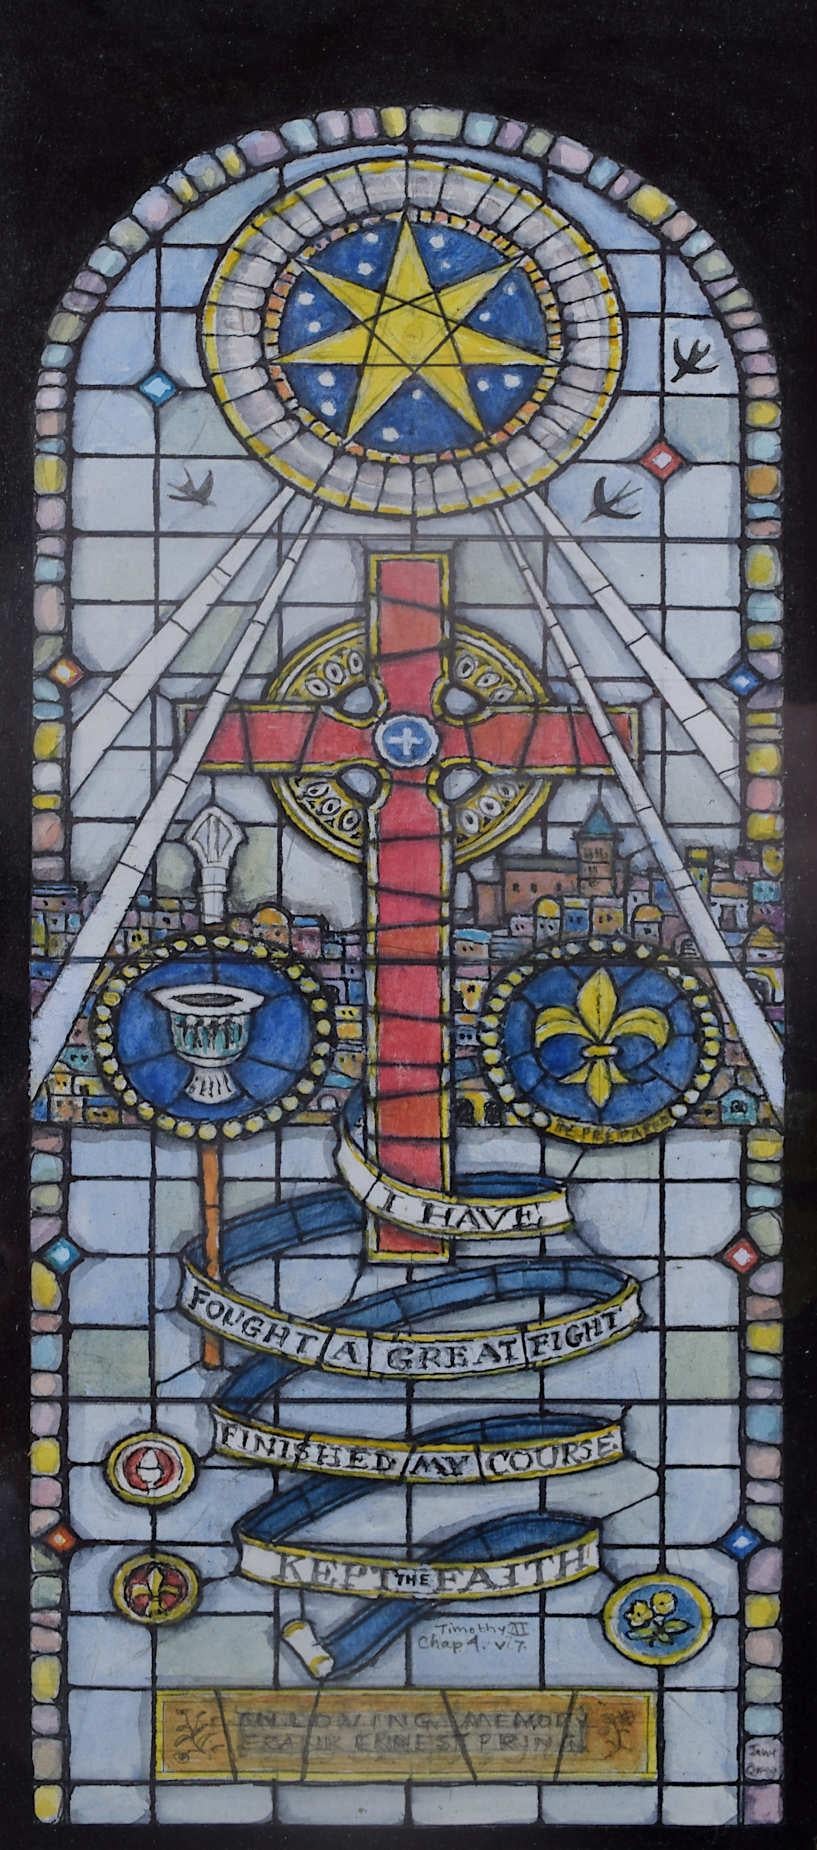 We acquired a series of watercolour stained glass designs from Jane Gray's studio. To find more scroll down to "More from this Seller" and below it click on "See all from this seller." 

Jane Gray (b.1931)
Stained Glass Design
Watercolour
25 x 9.5